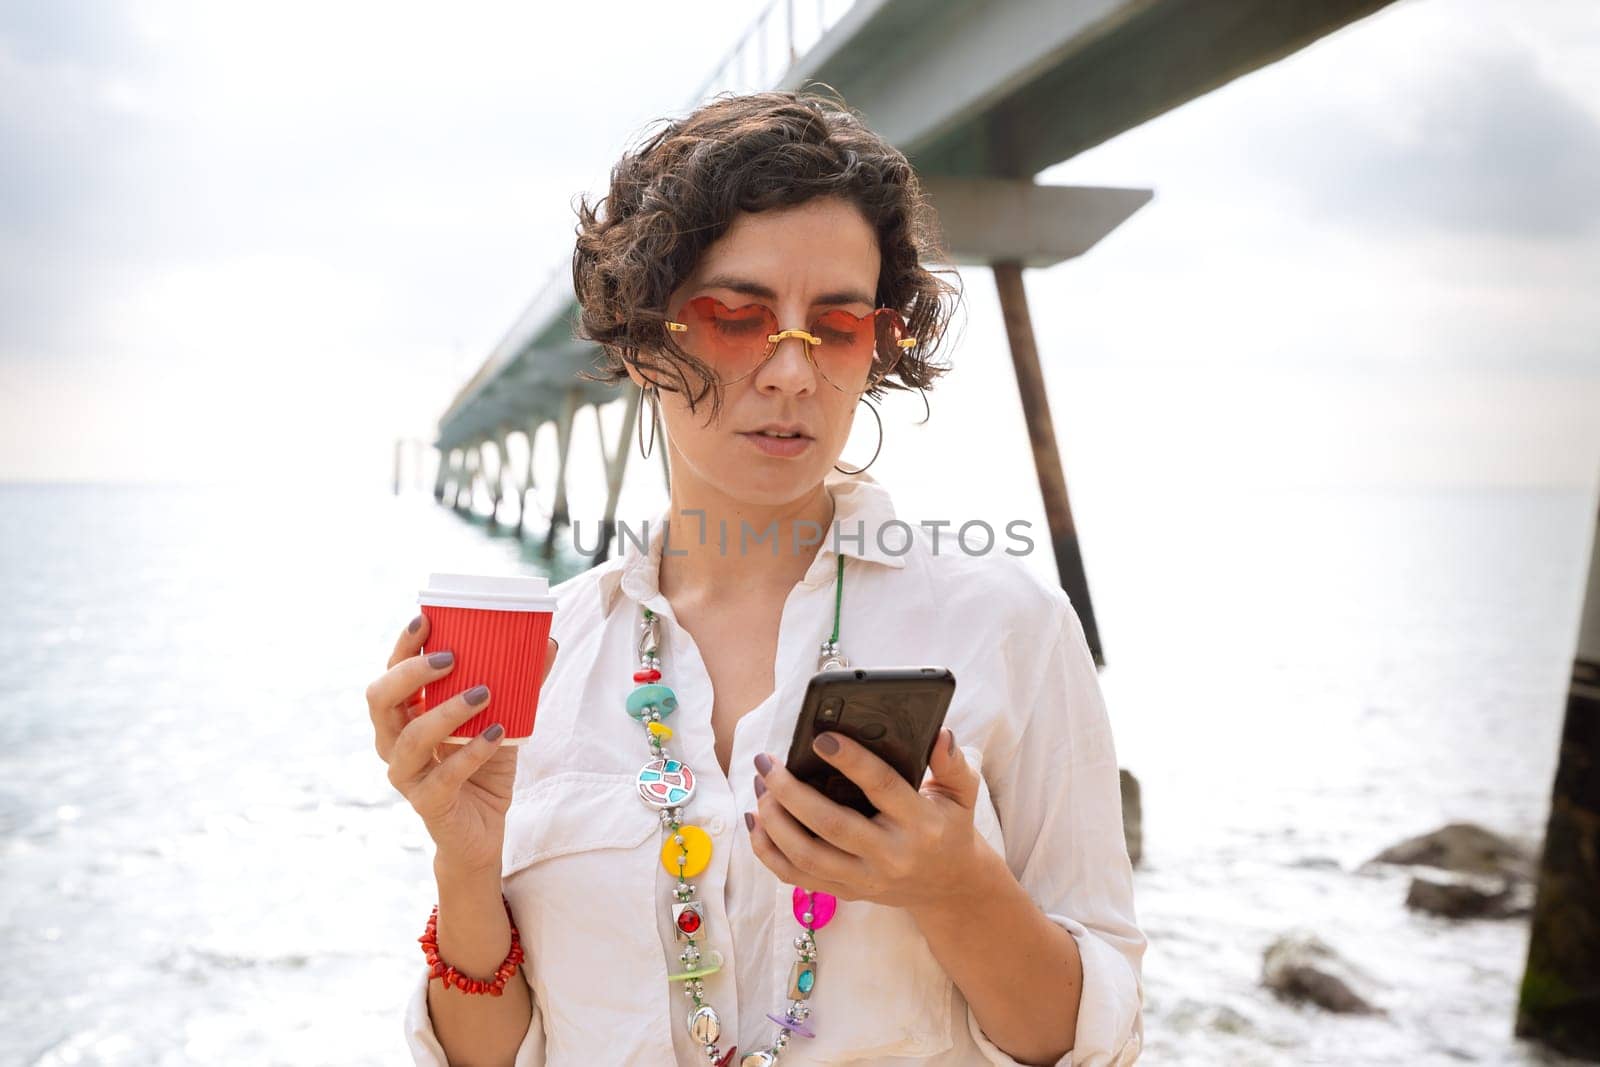 Front view of a caucasian woman wearing sunglasses on vacation by the sea laughing using a social media app with her mobile phone, holding a caffee.